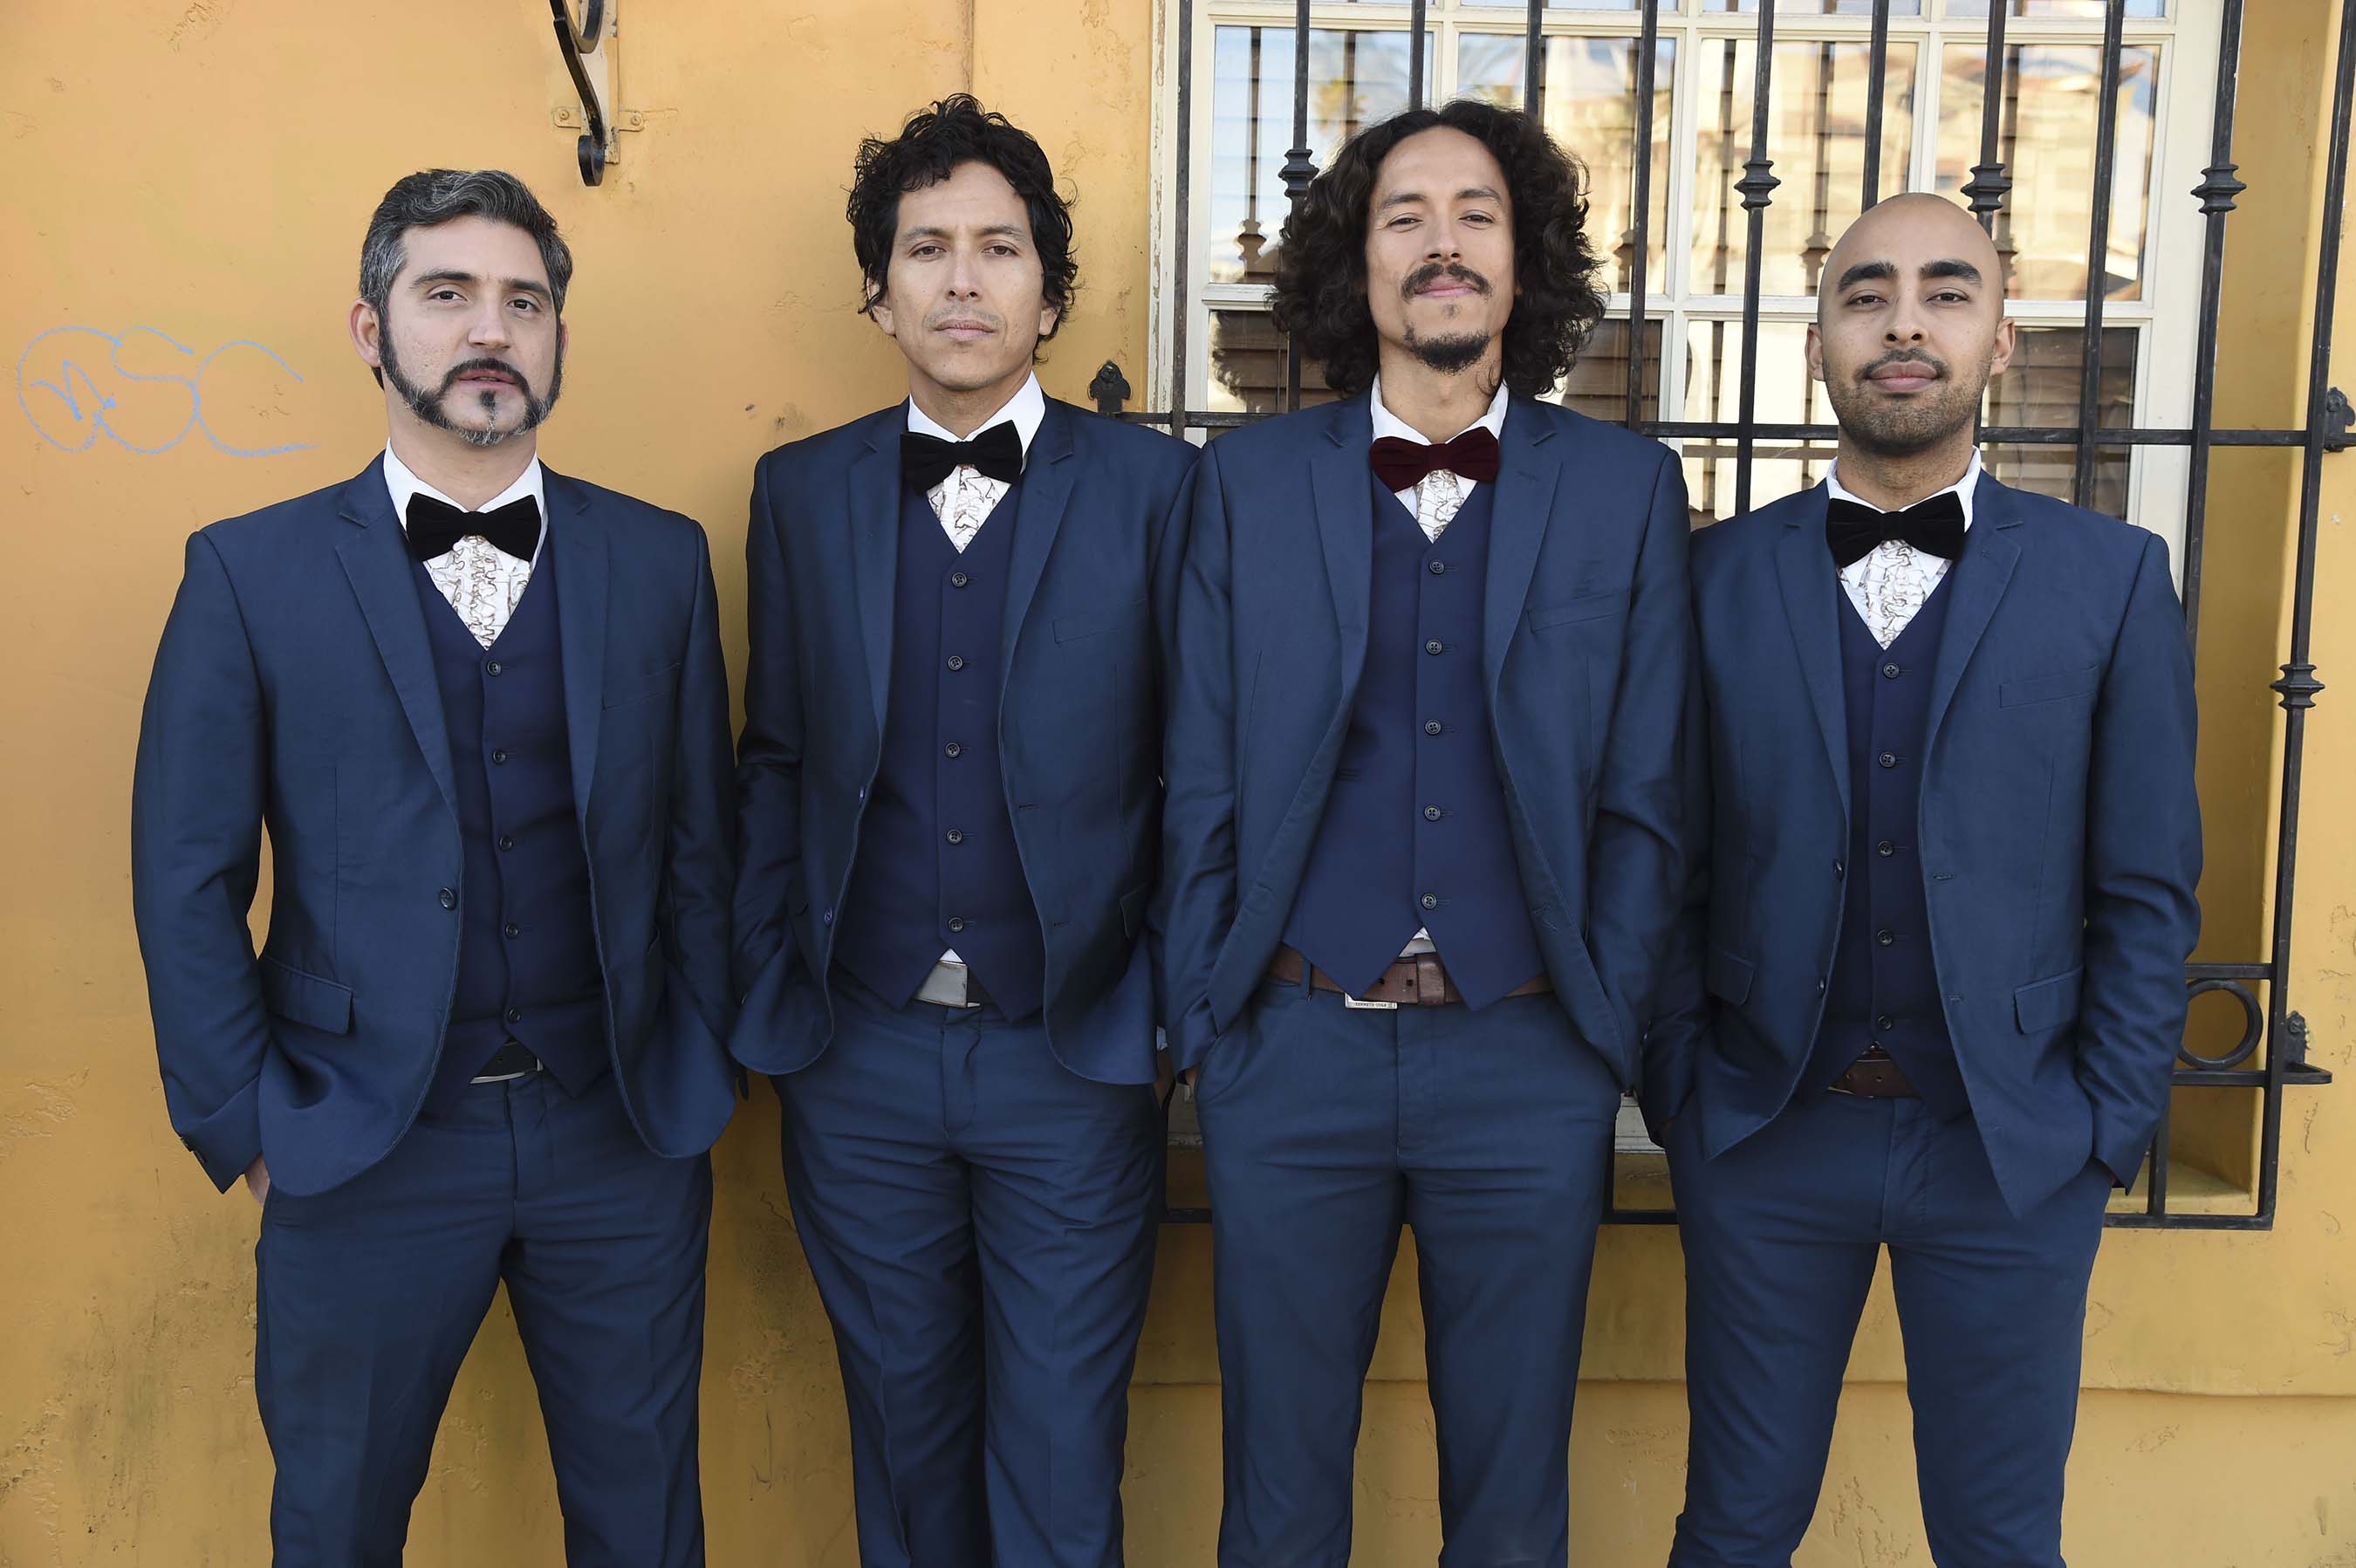 LA-based soul band, Chicano Batman, reinterprets the iconic American anthem, ‘This Land Is Your Land,’ in support of Johnnie Walker’s new Keep Walking America campaign (Michael Kovac/Getty Images).